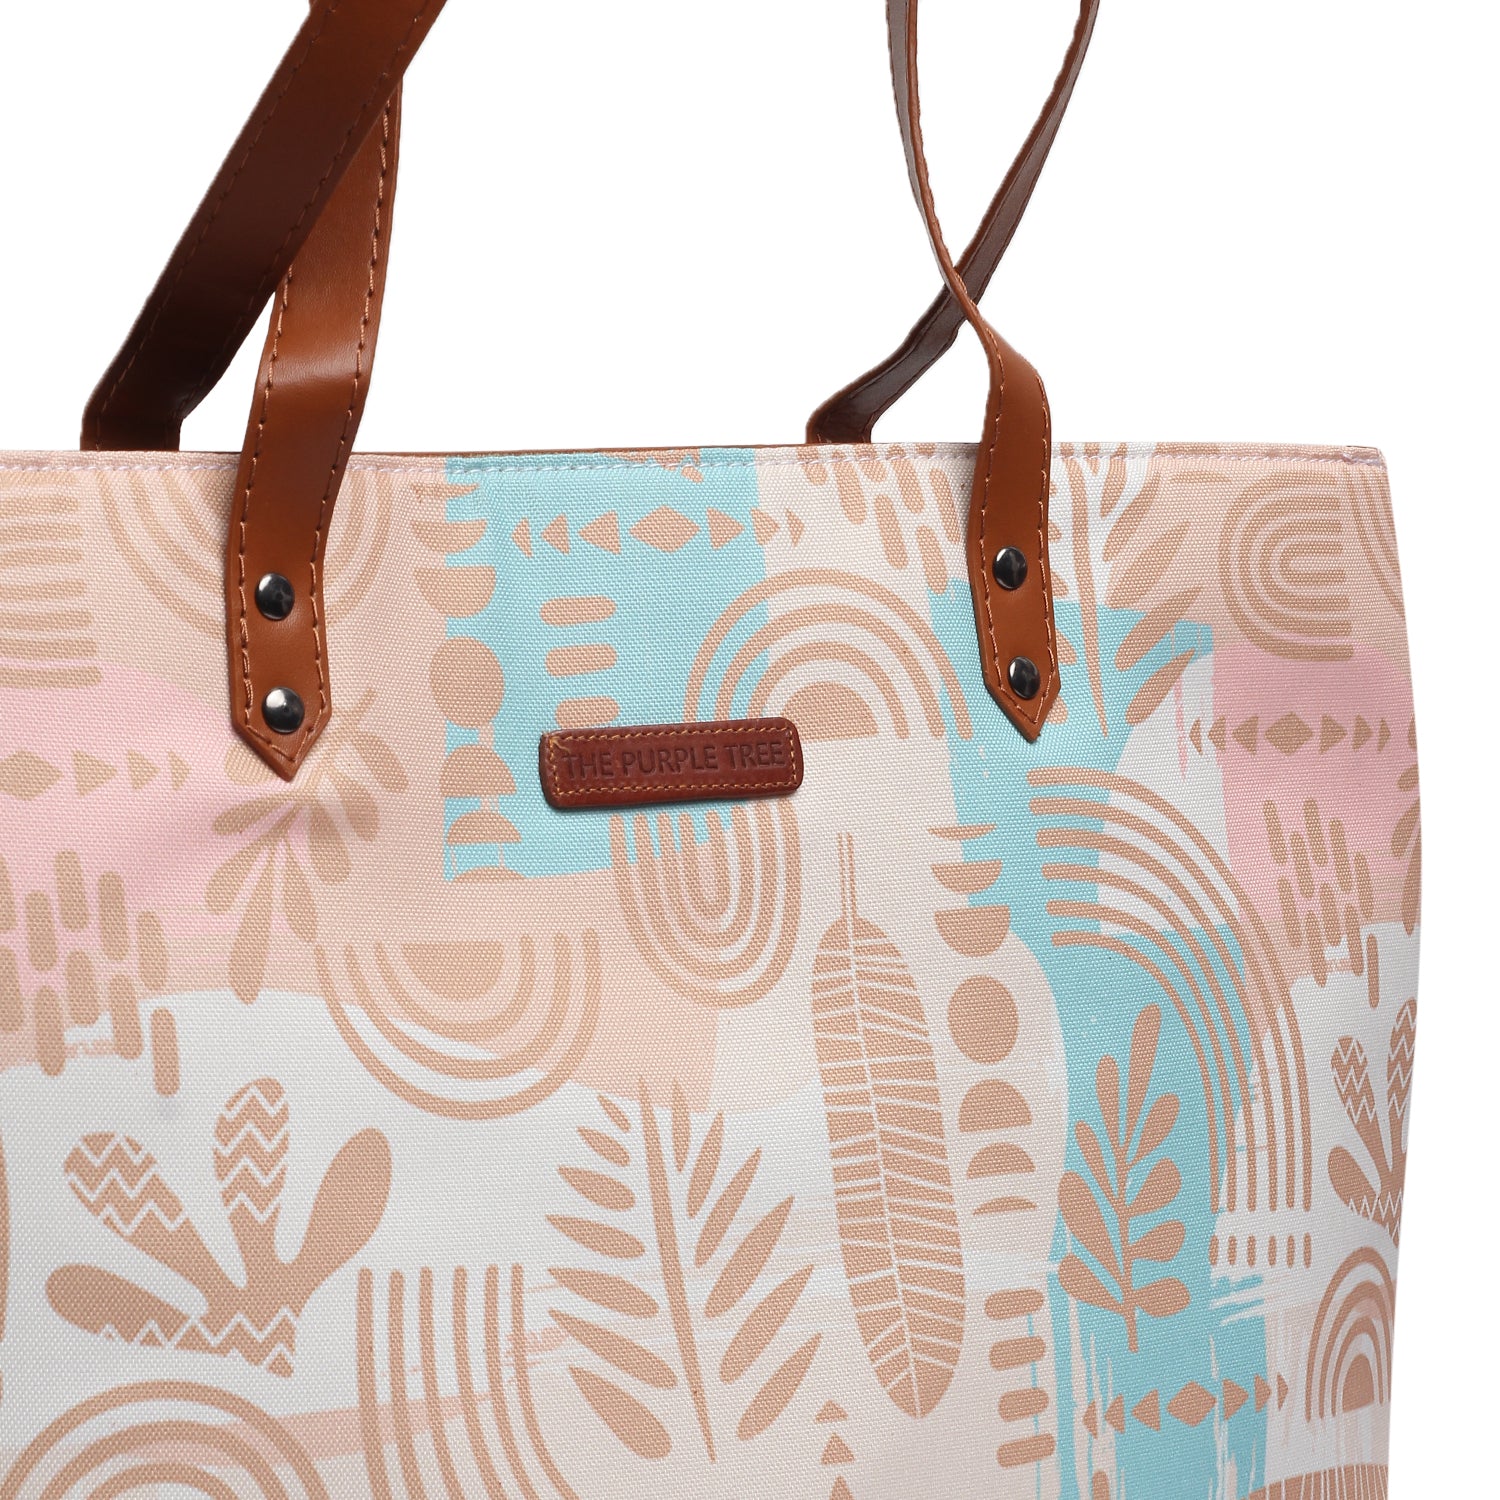 Fashionable tote bag in a light blue and pink pattern, a must-have accessory.